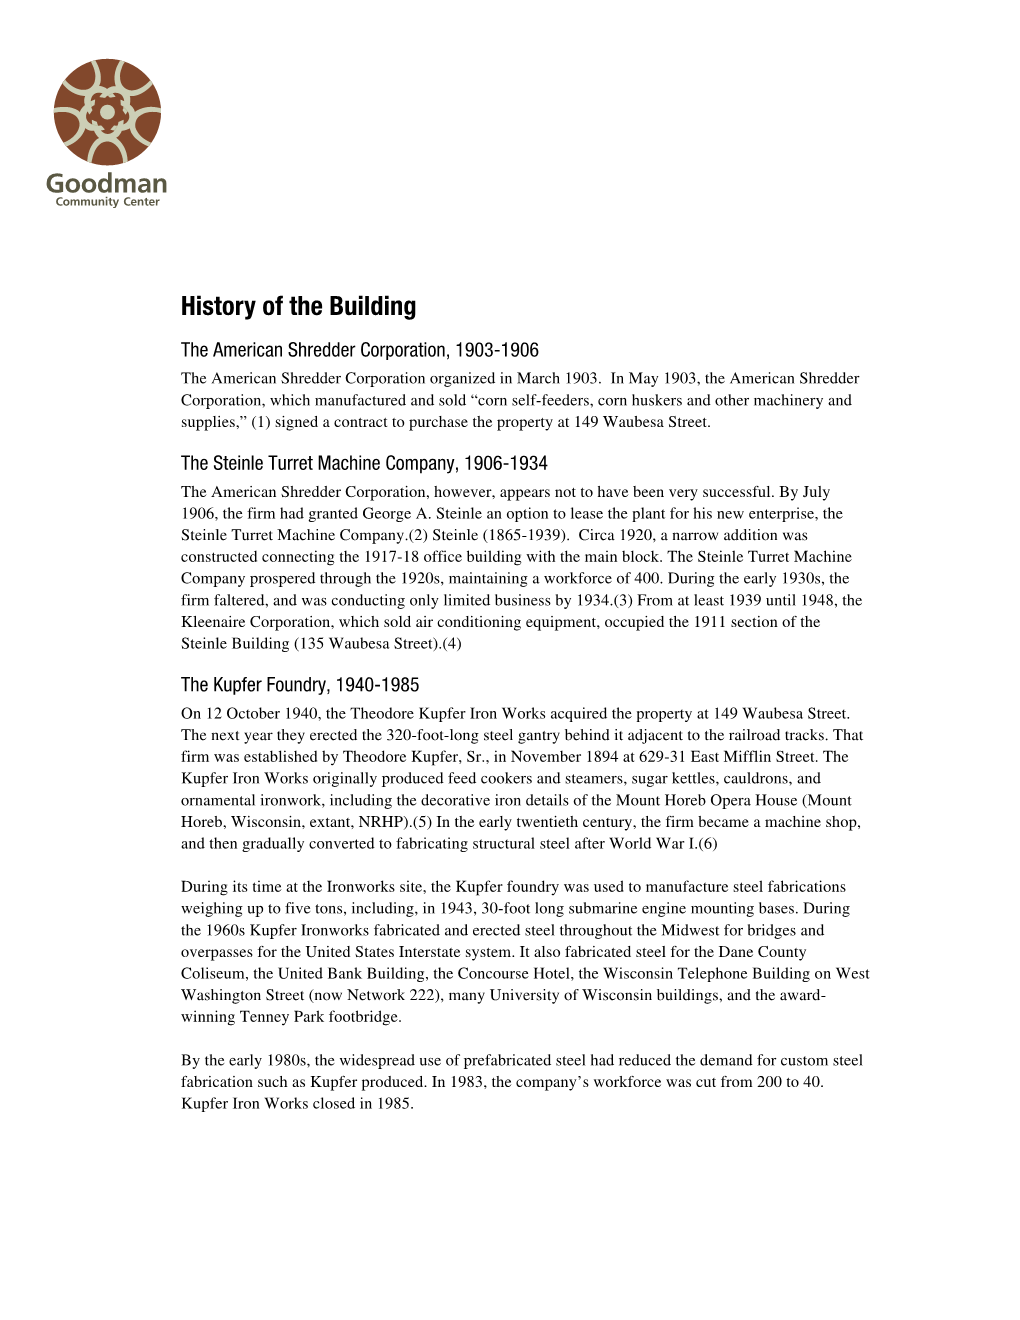 History of the Building the American Shredder Corporation, 1903-1906 the American Shredder Corporation Organized in March 1903